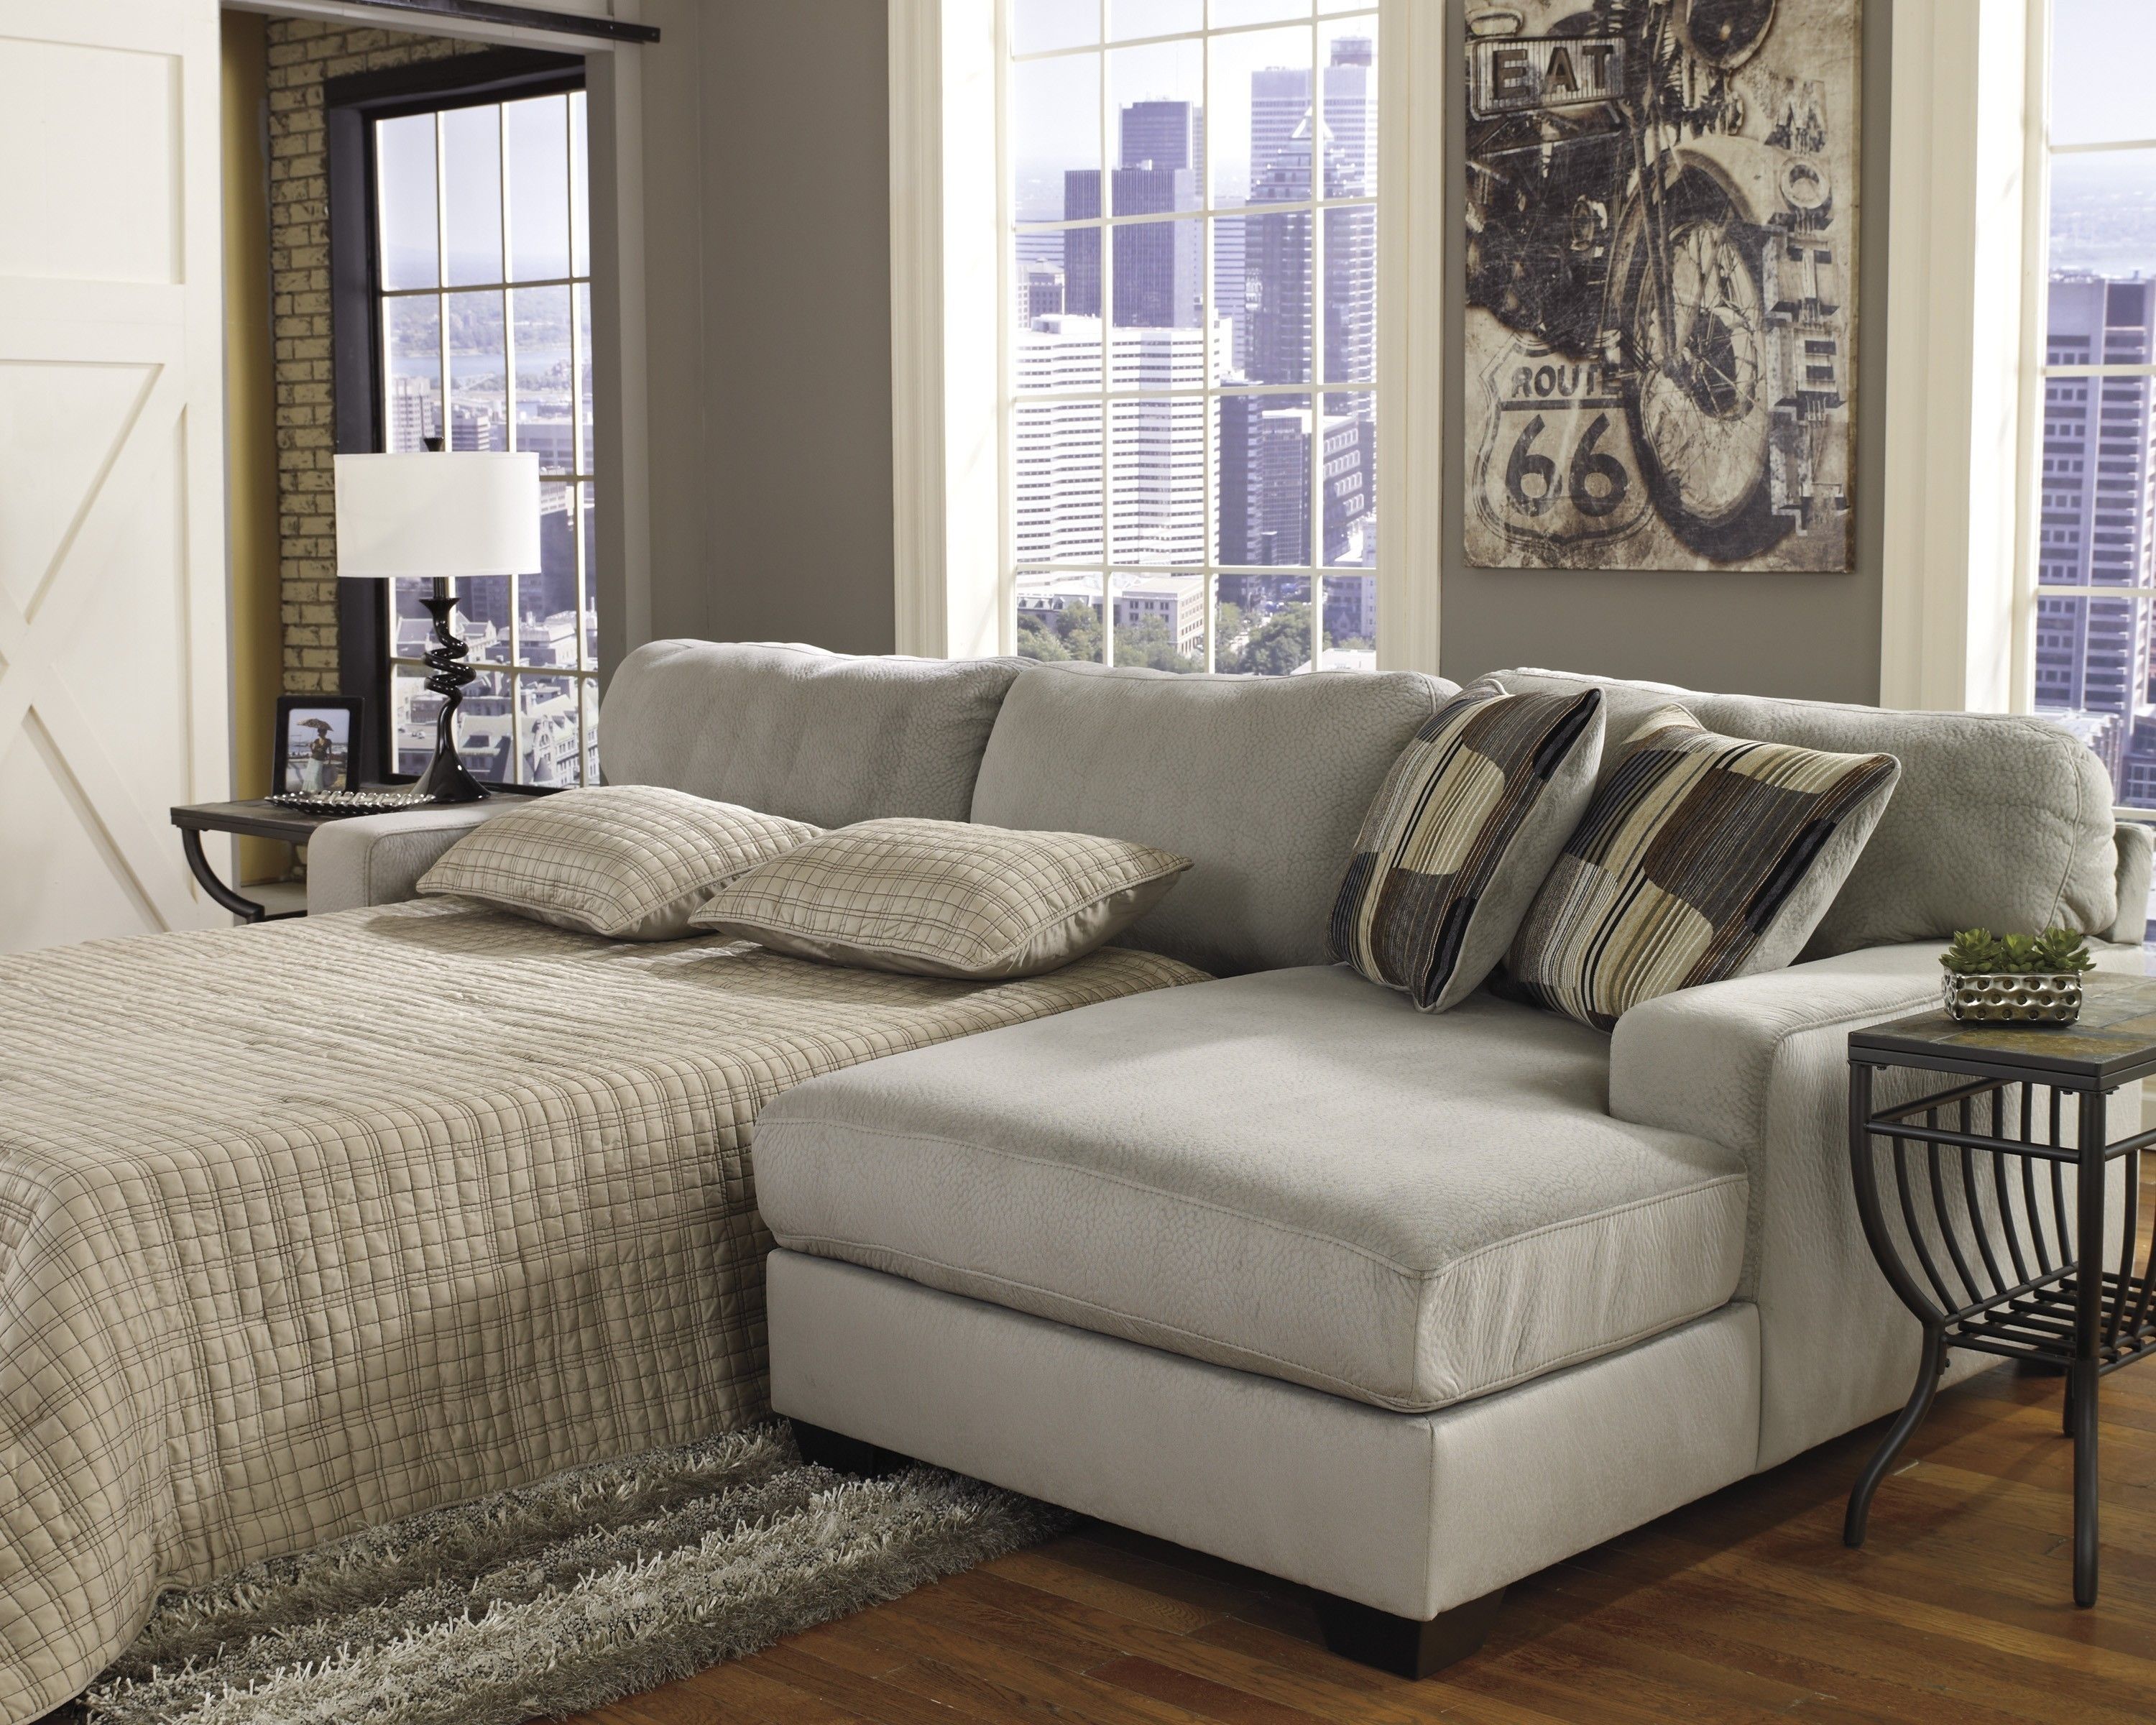 Sectional Sofa With Queen Size Sleeper | Http://tmidb Within Sectional Sofas With Queen Size Sleeper (View 2 of 10)